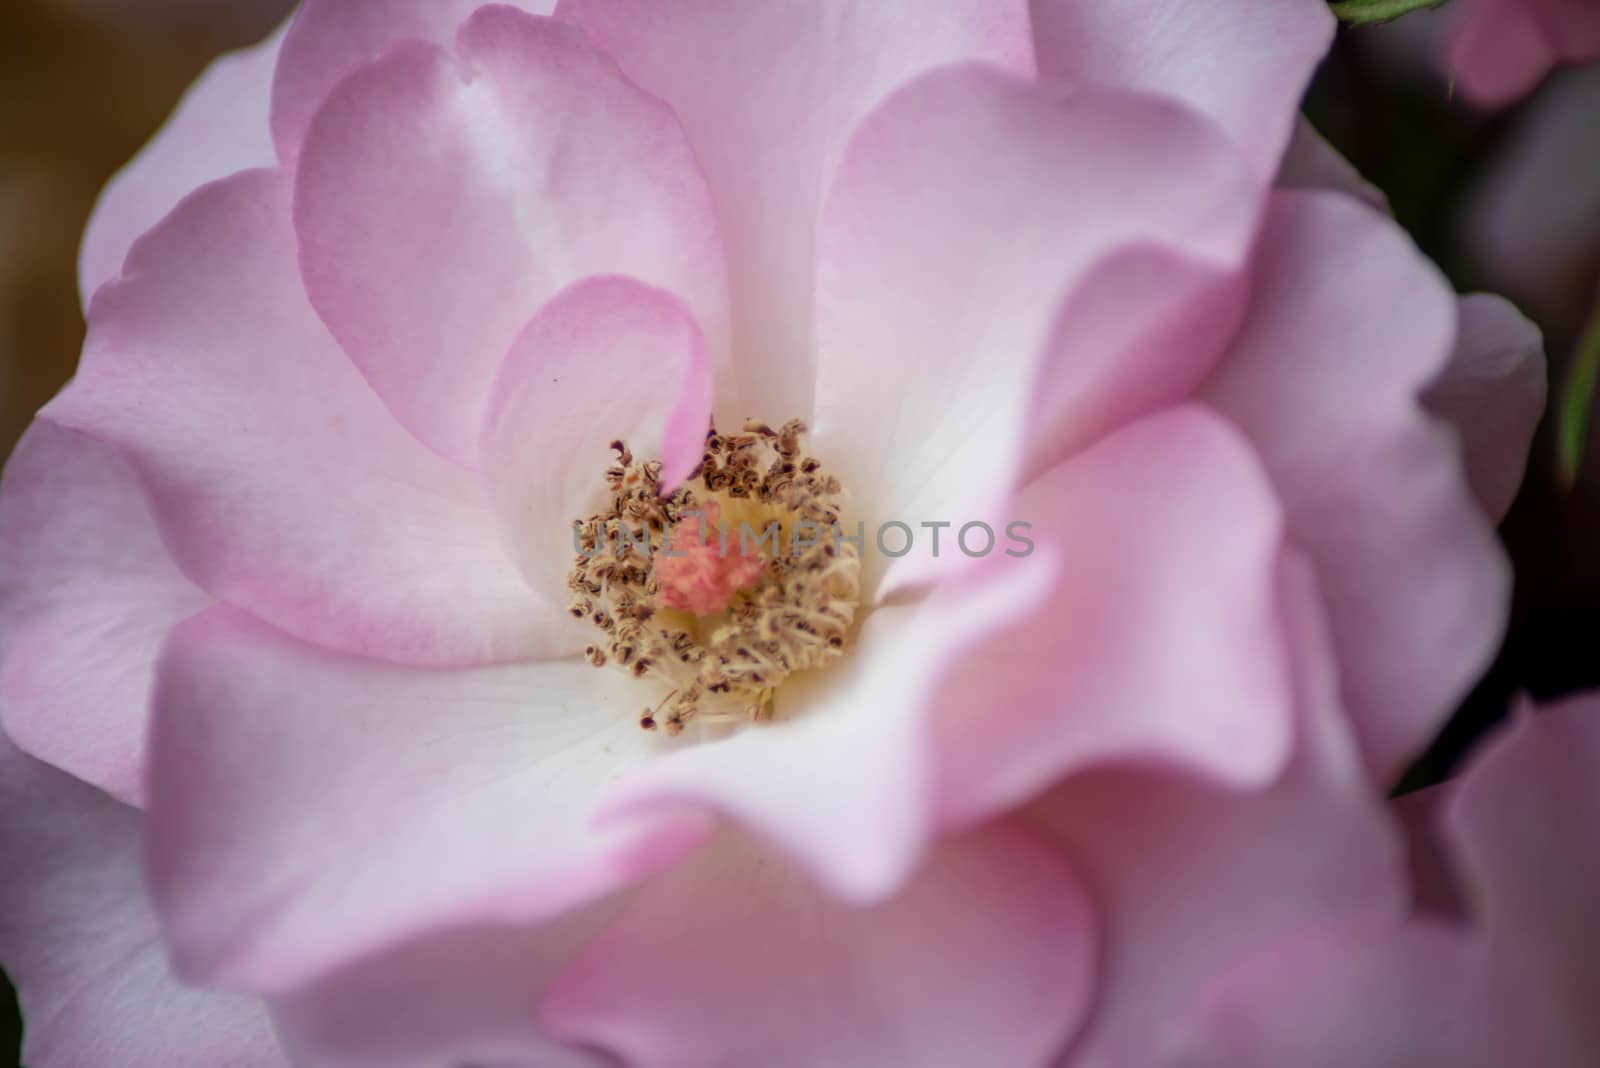 Soft textured petals draws the eye to the interior. Full frame macro image in natural light.